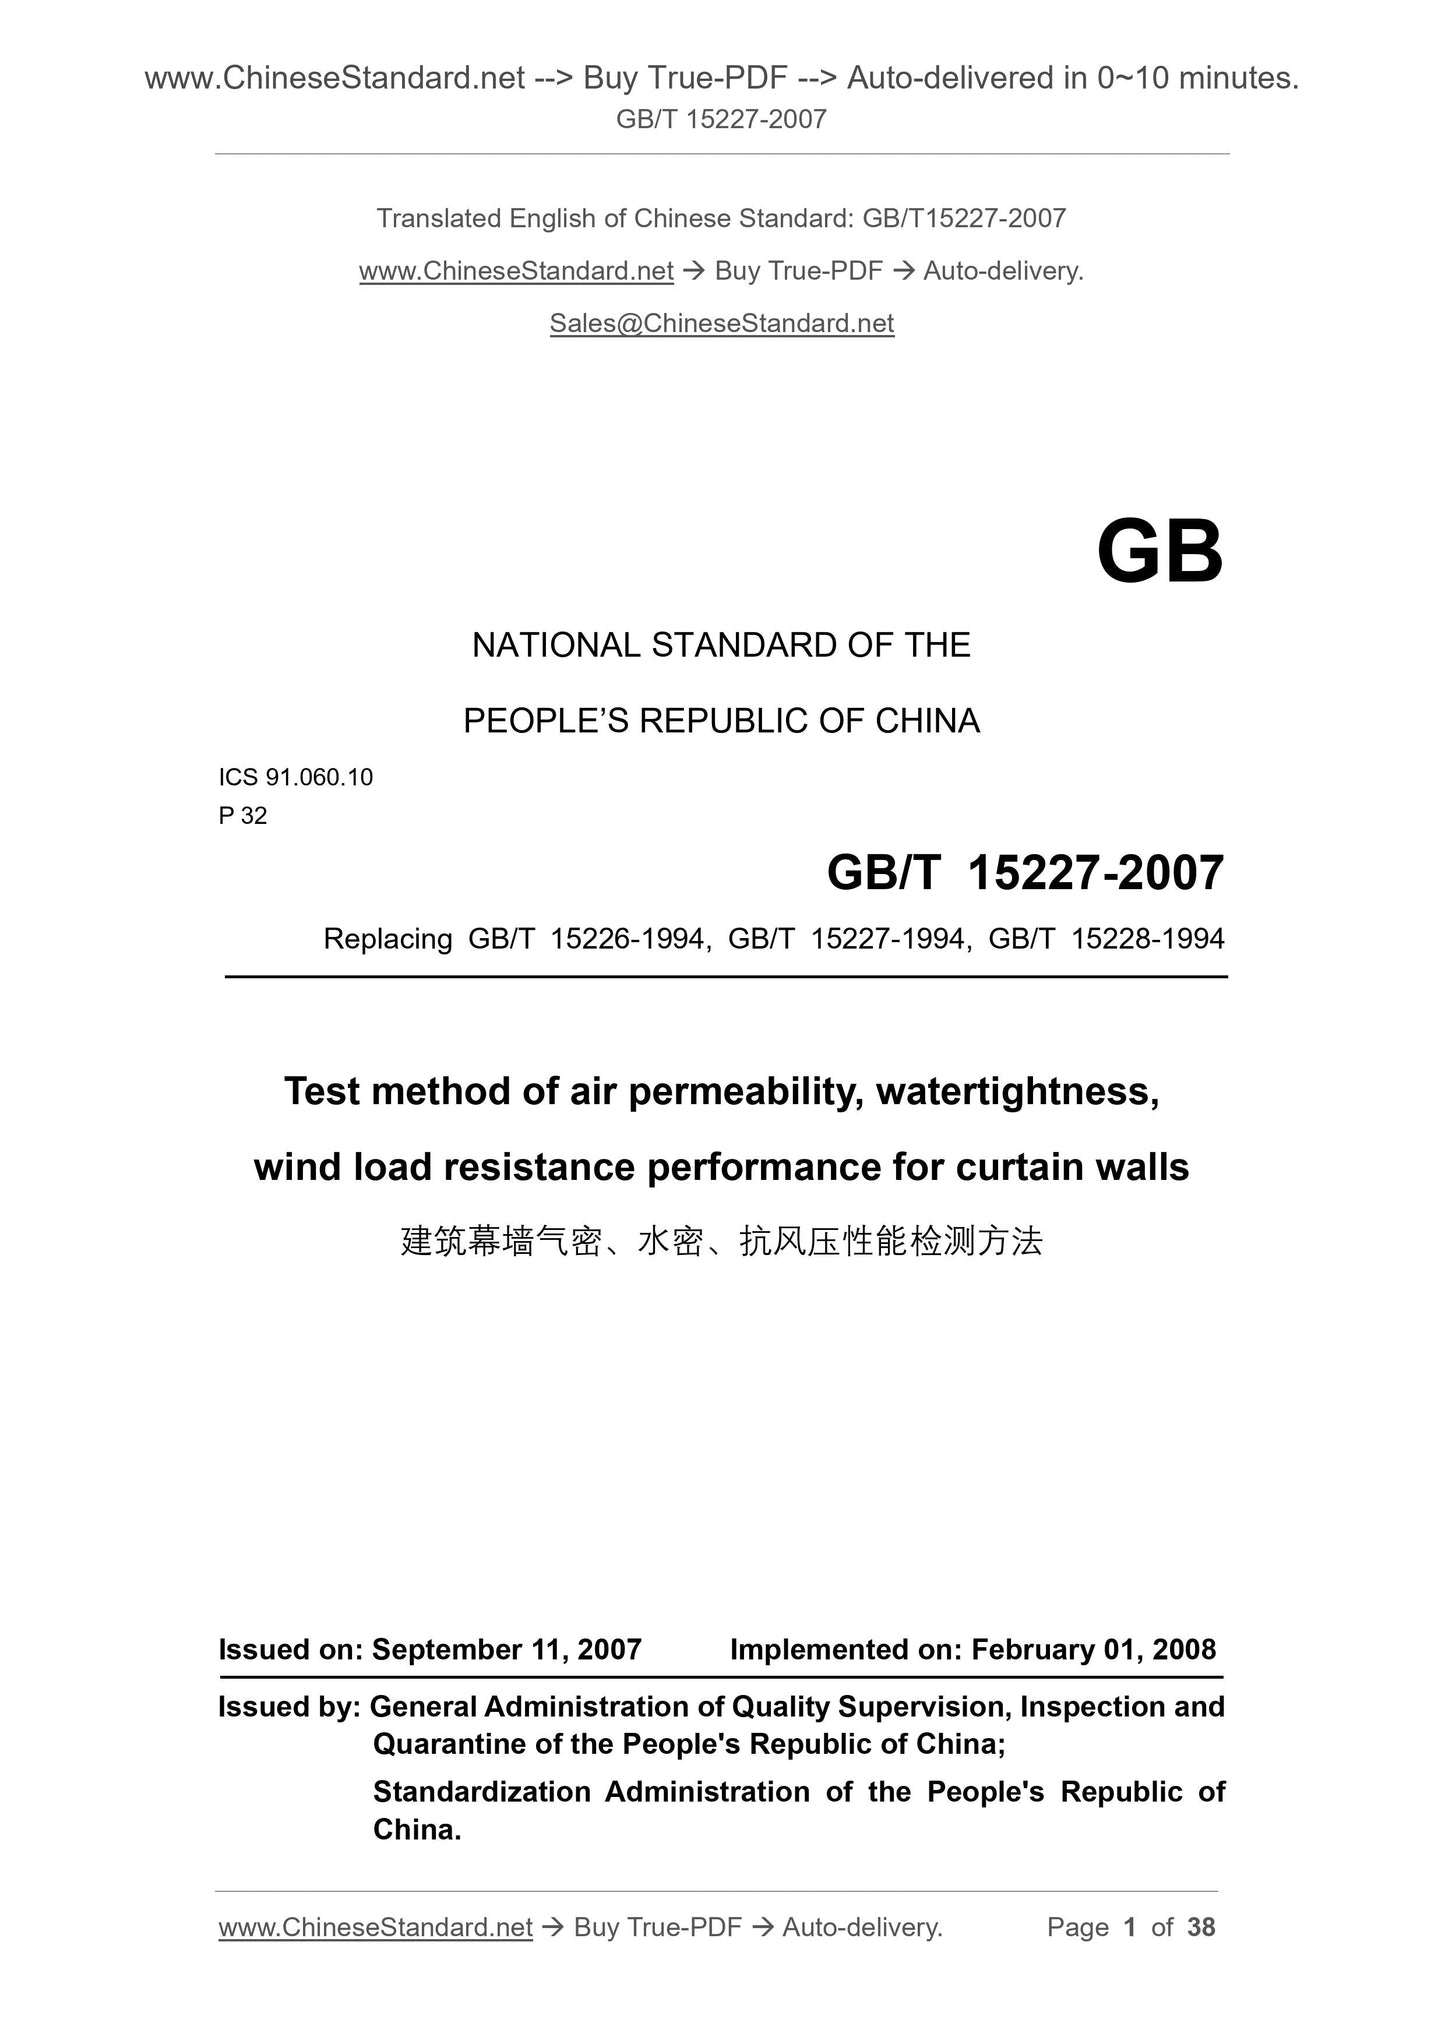 GB/T 15227-2007 Page 1